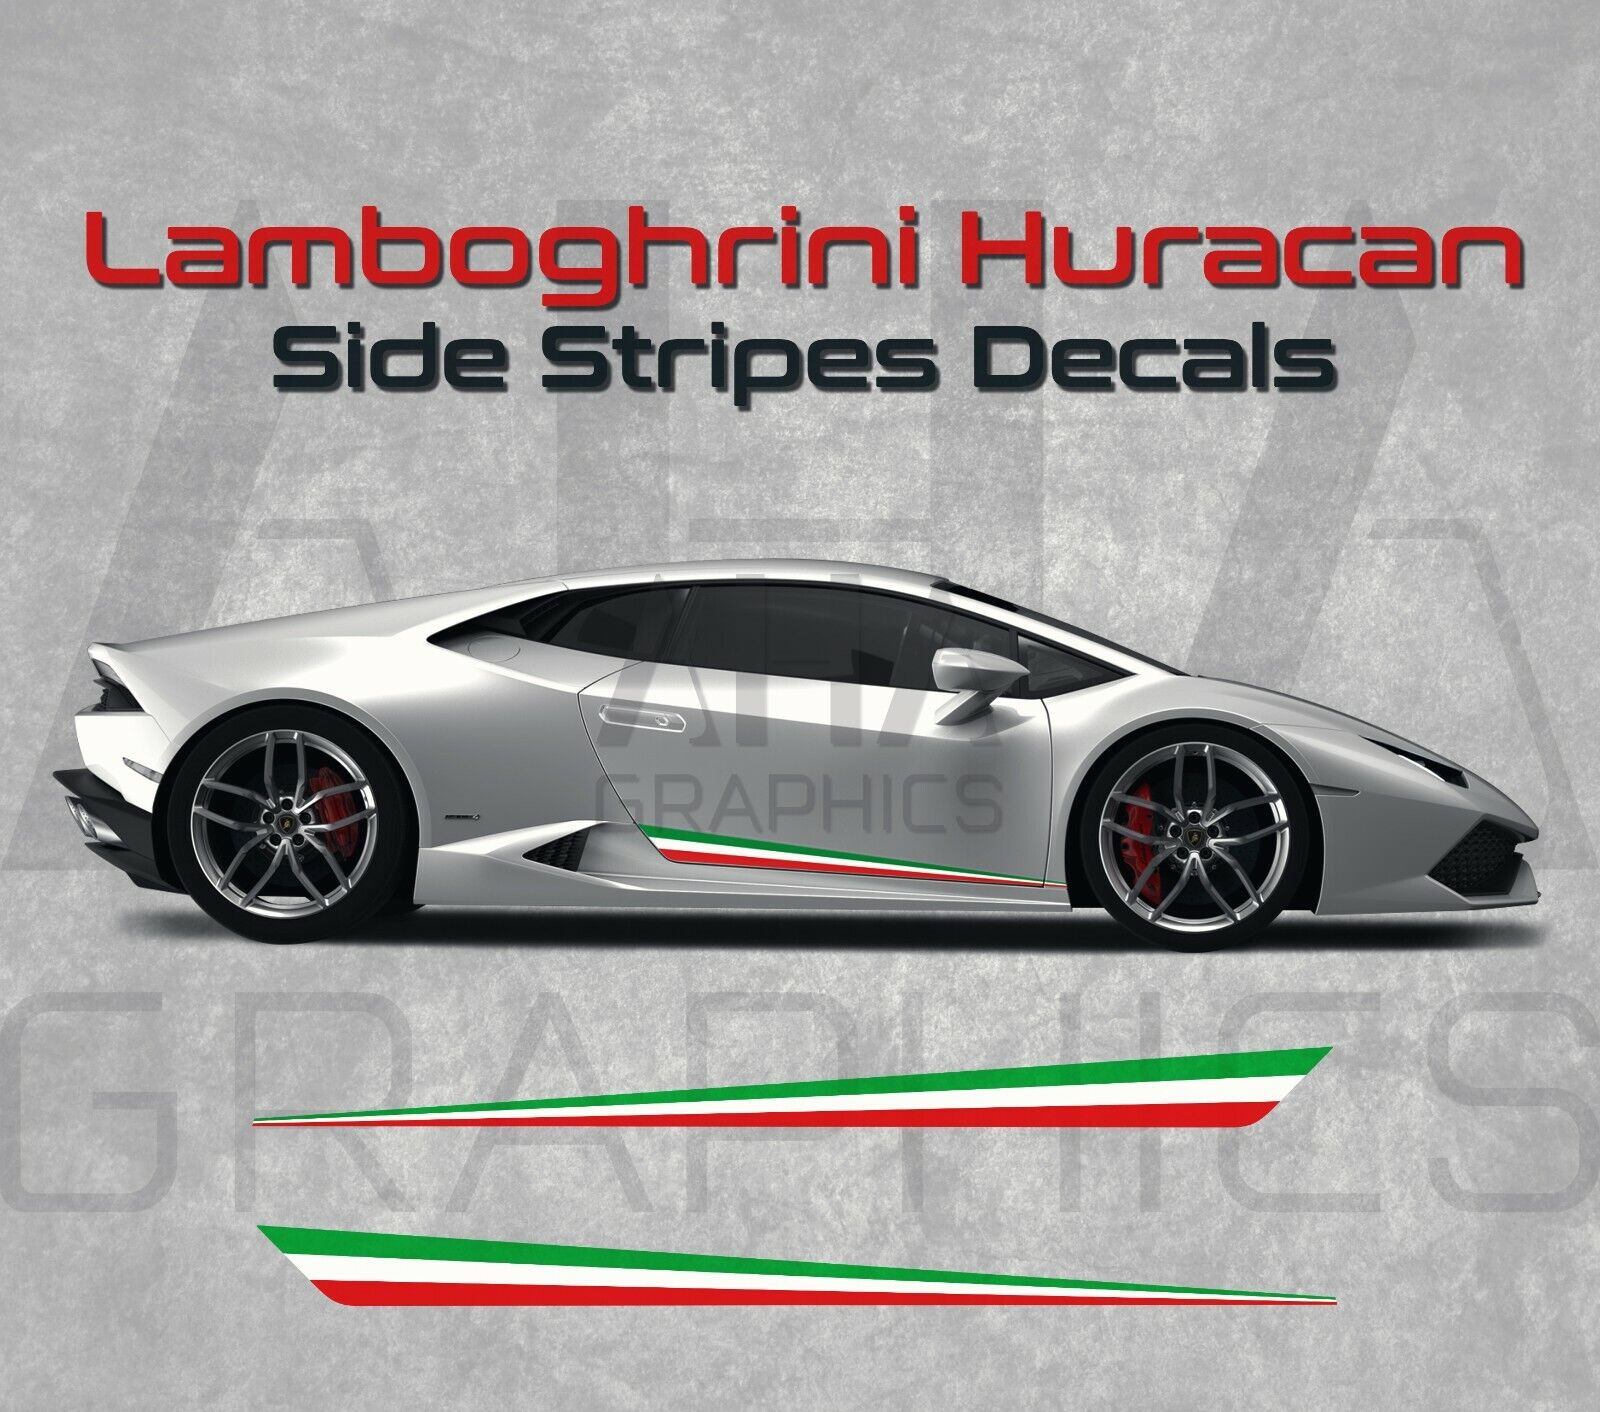 Lamborghini Huracan Performante Side Stripes Decals Italy Side Stripes Decals